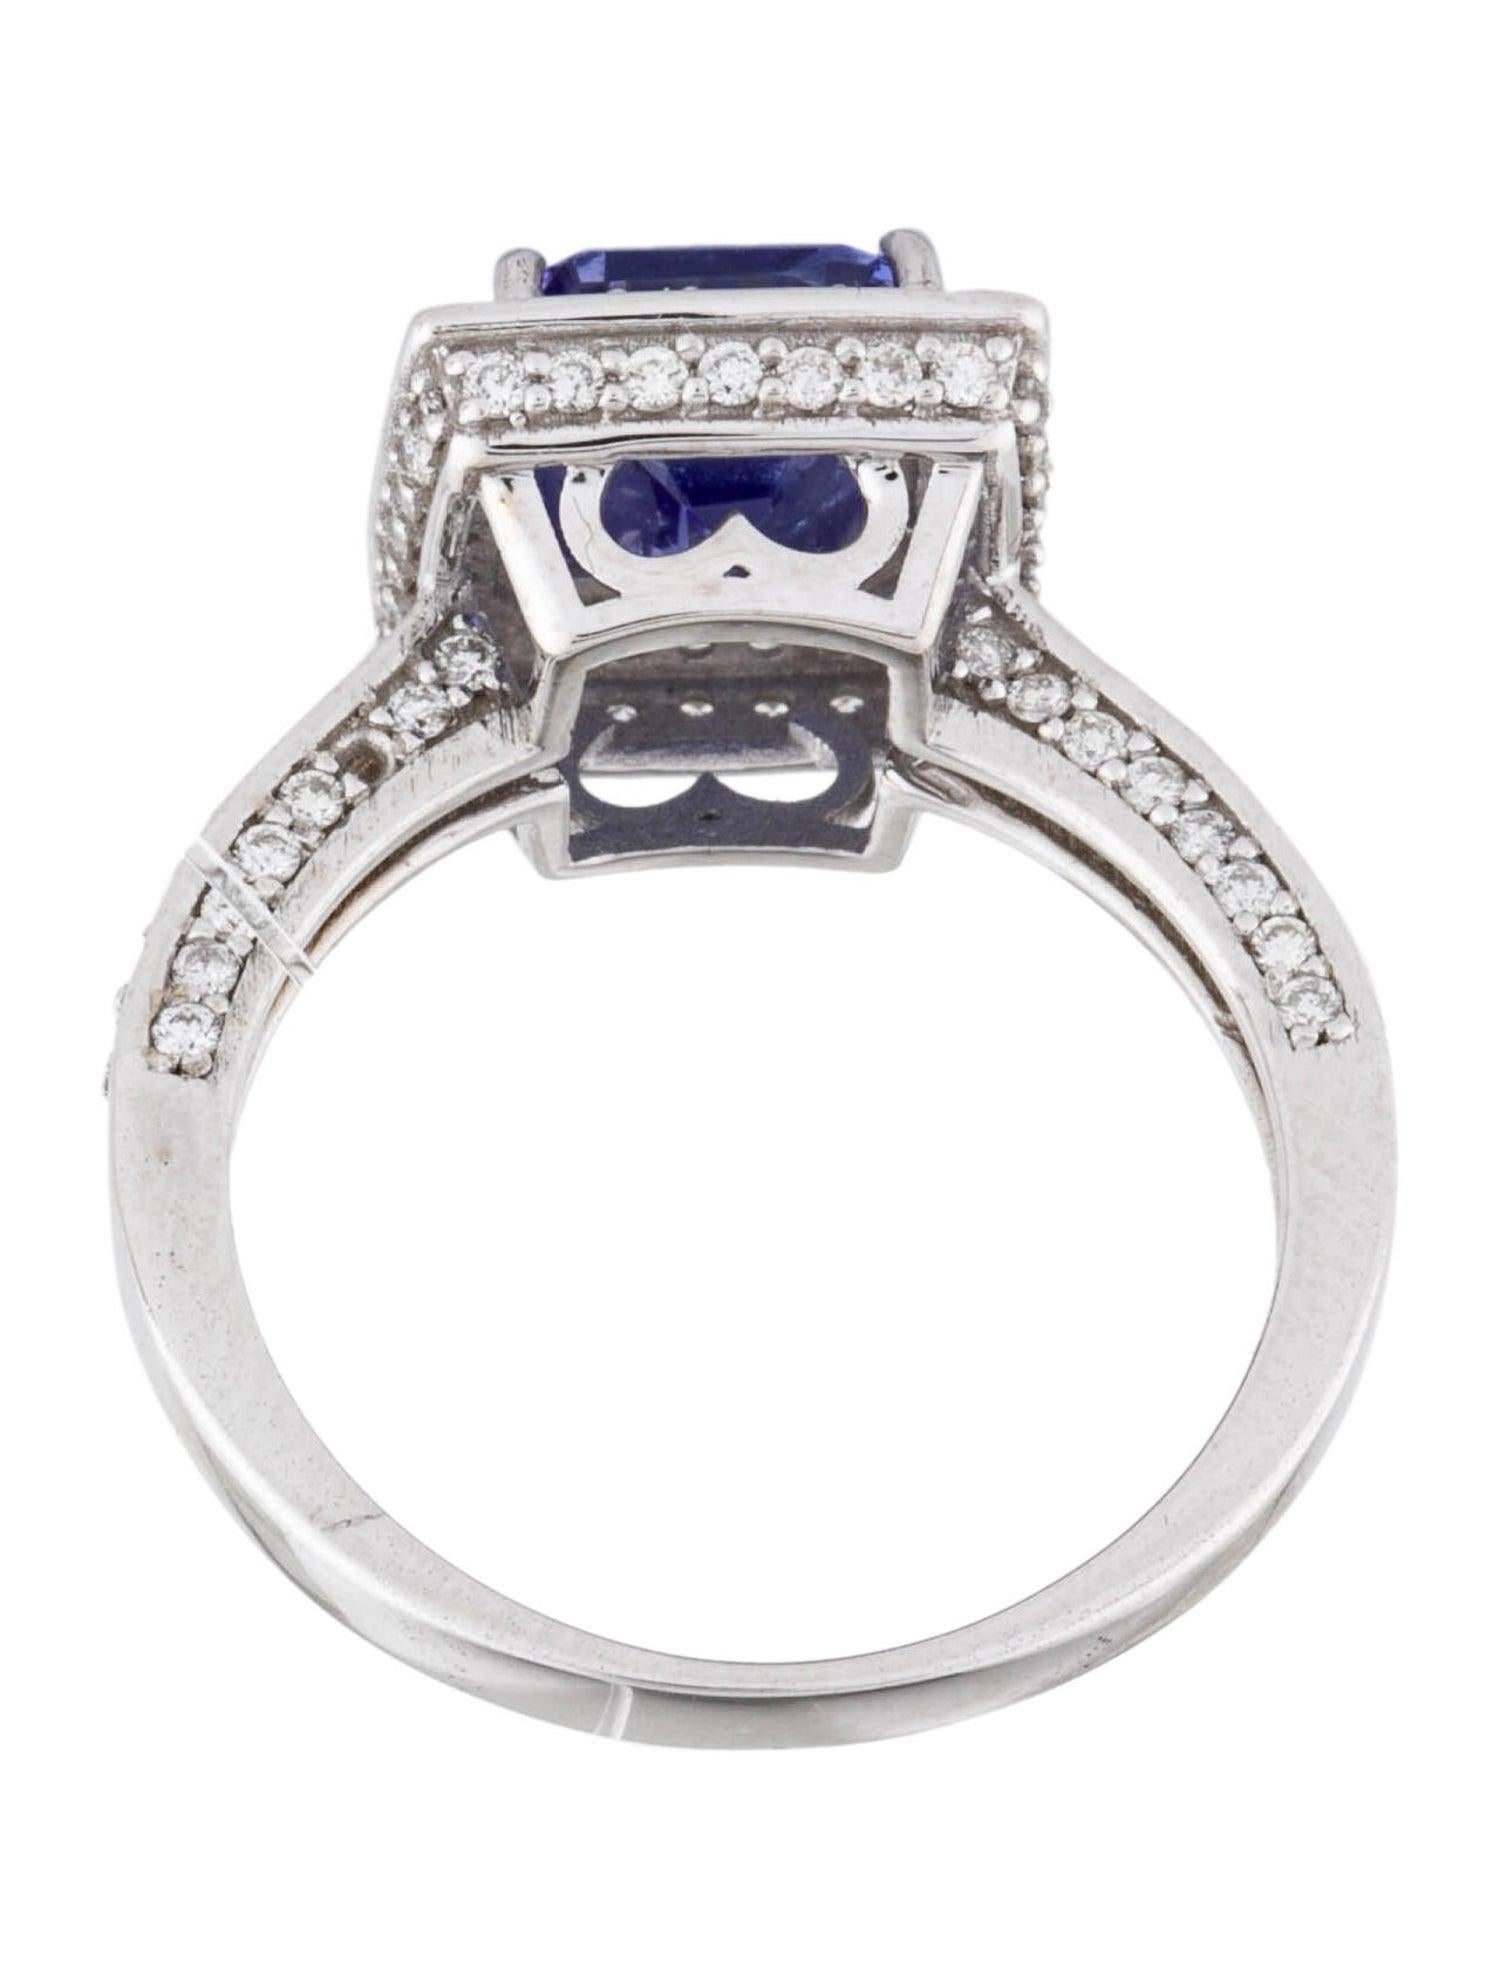 14K Tanzanite & Diamond Cocktail Ring - 2.67ctw - Size 7 - Statement Jewelry In New Condition For Sale In Holtsville, NY